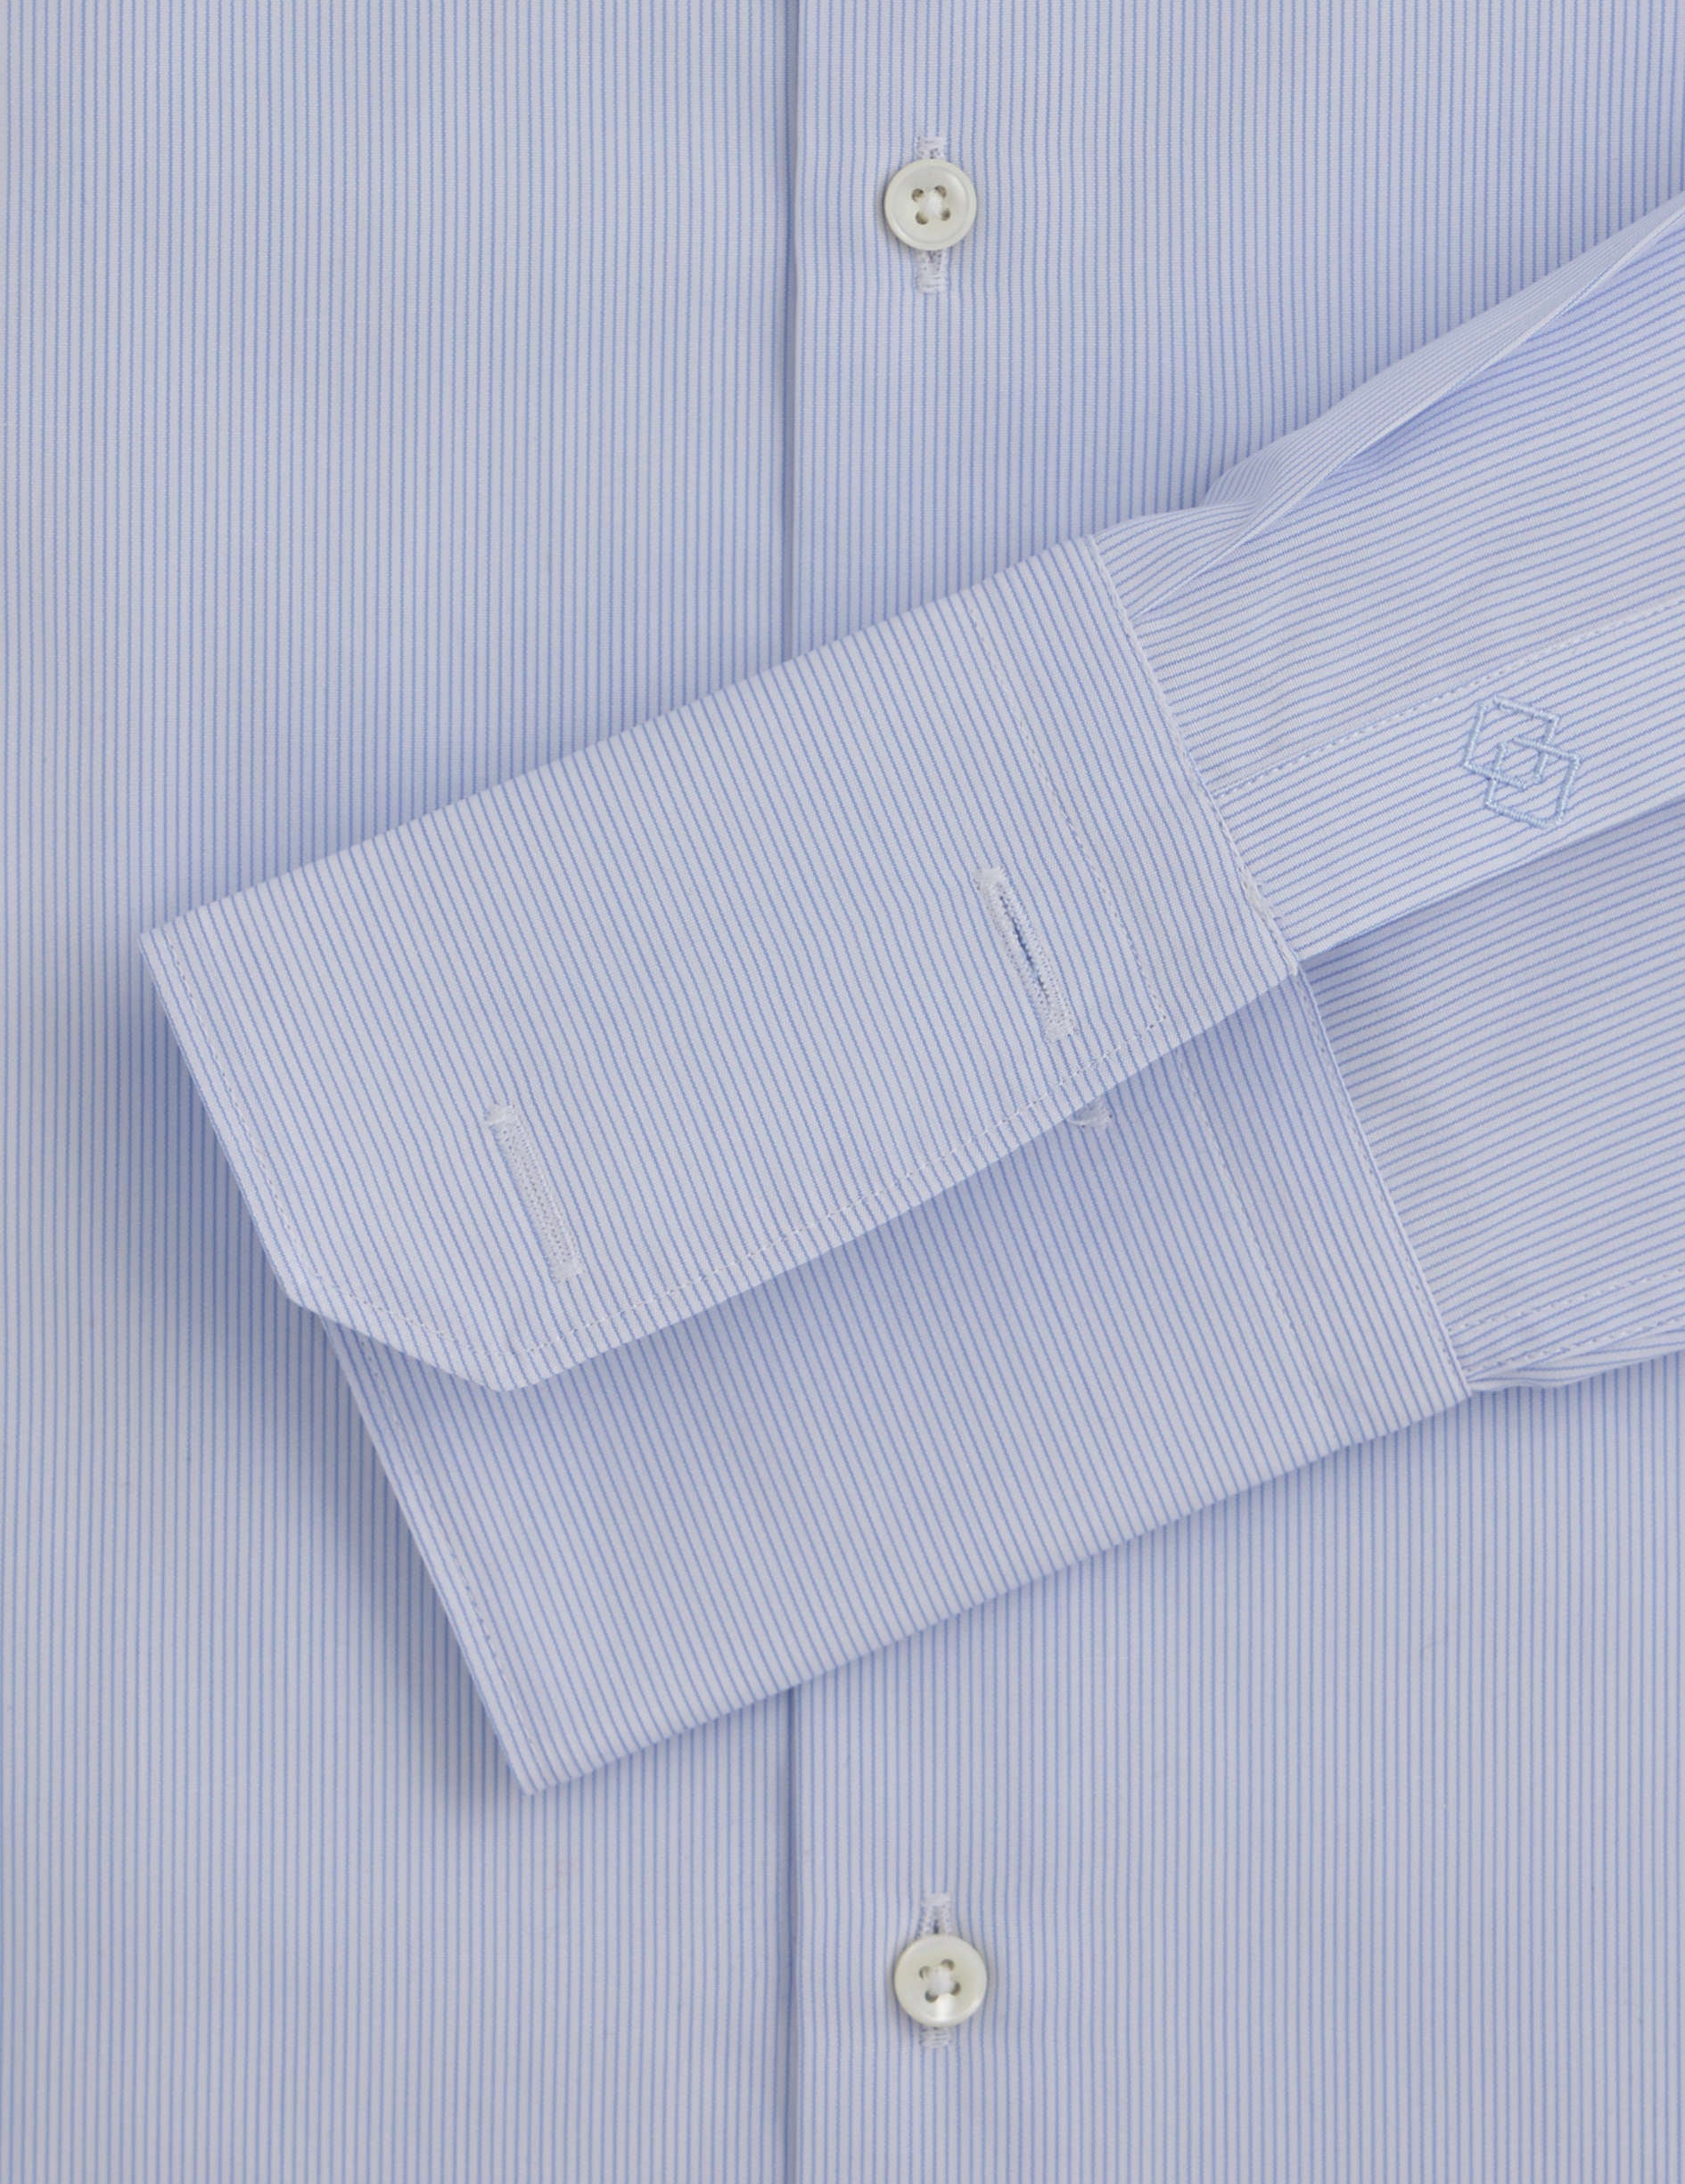 Fitted blue striped shirt - Poplin - Figaret Collar - French Cuffs